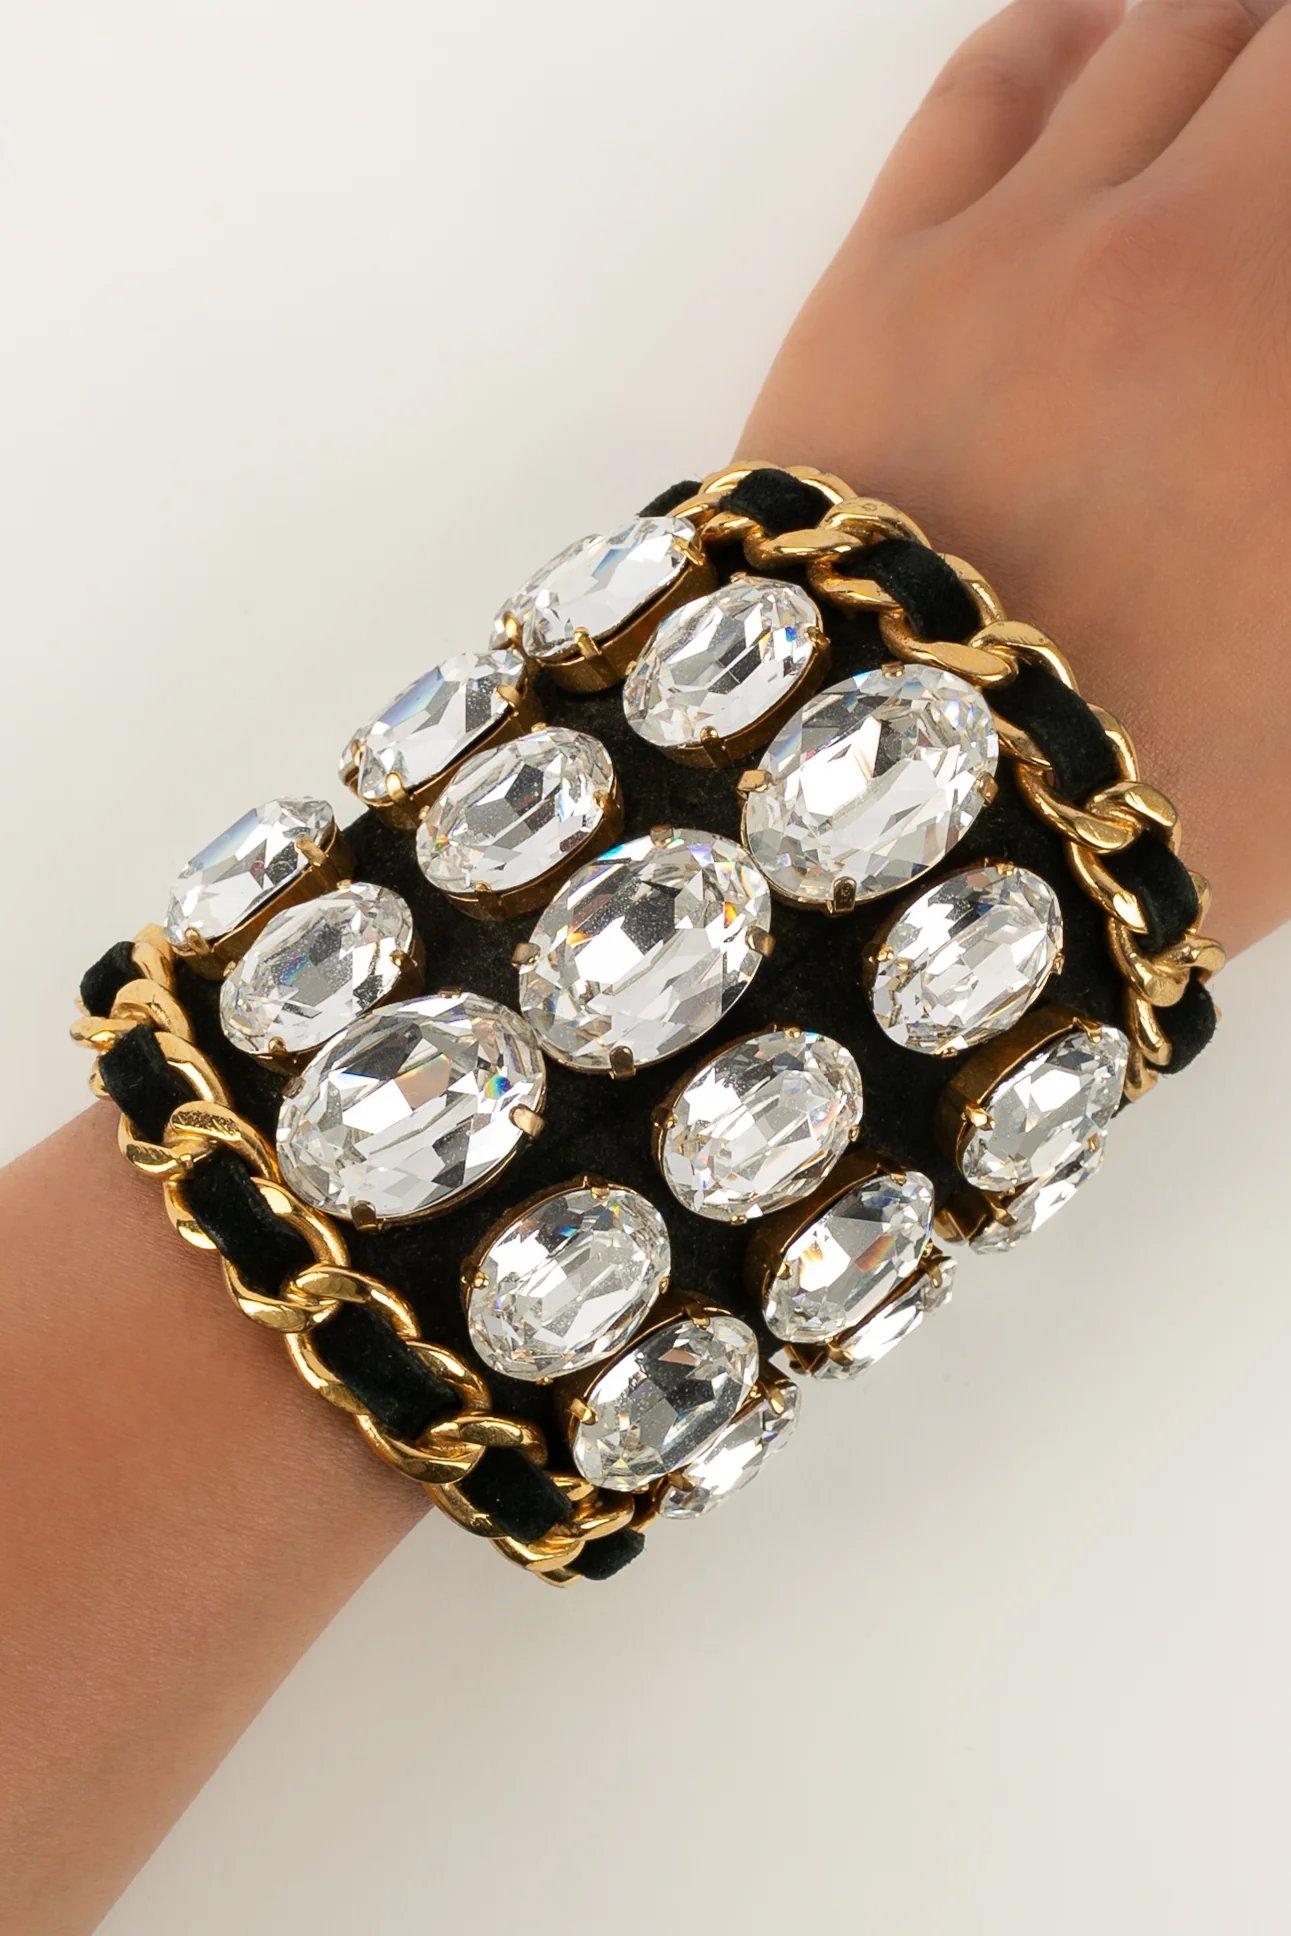 Chanel Cuff Bracelet in Black Leather and Gold Metal with Rhinestones For Sale 1